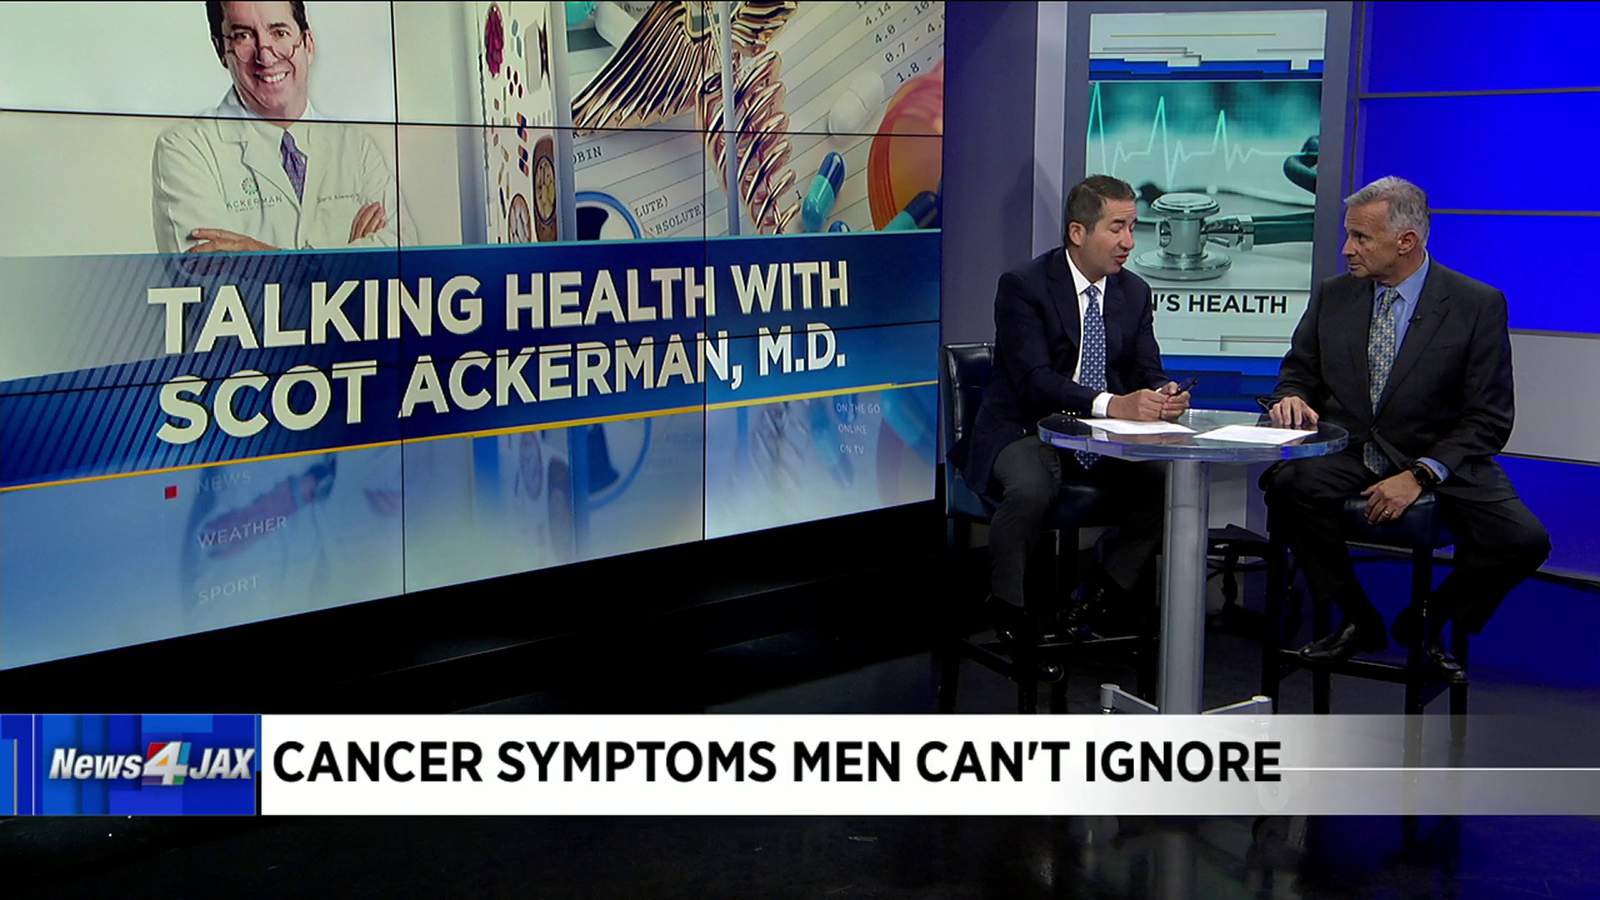 Oncologist Scot Ackerman on symptoms of cancer